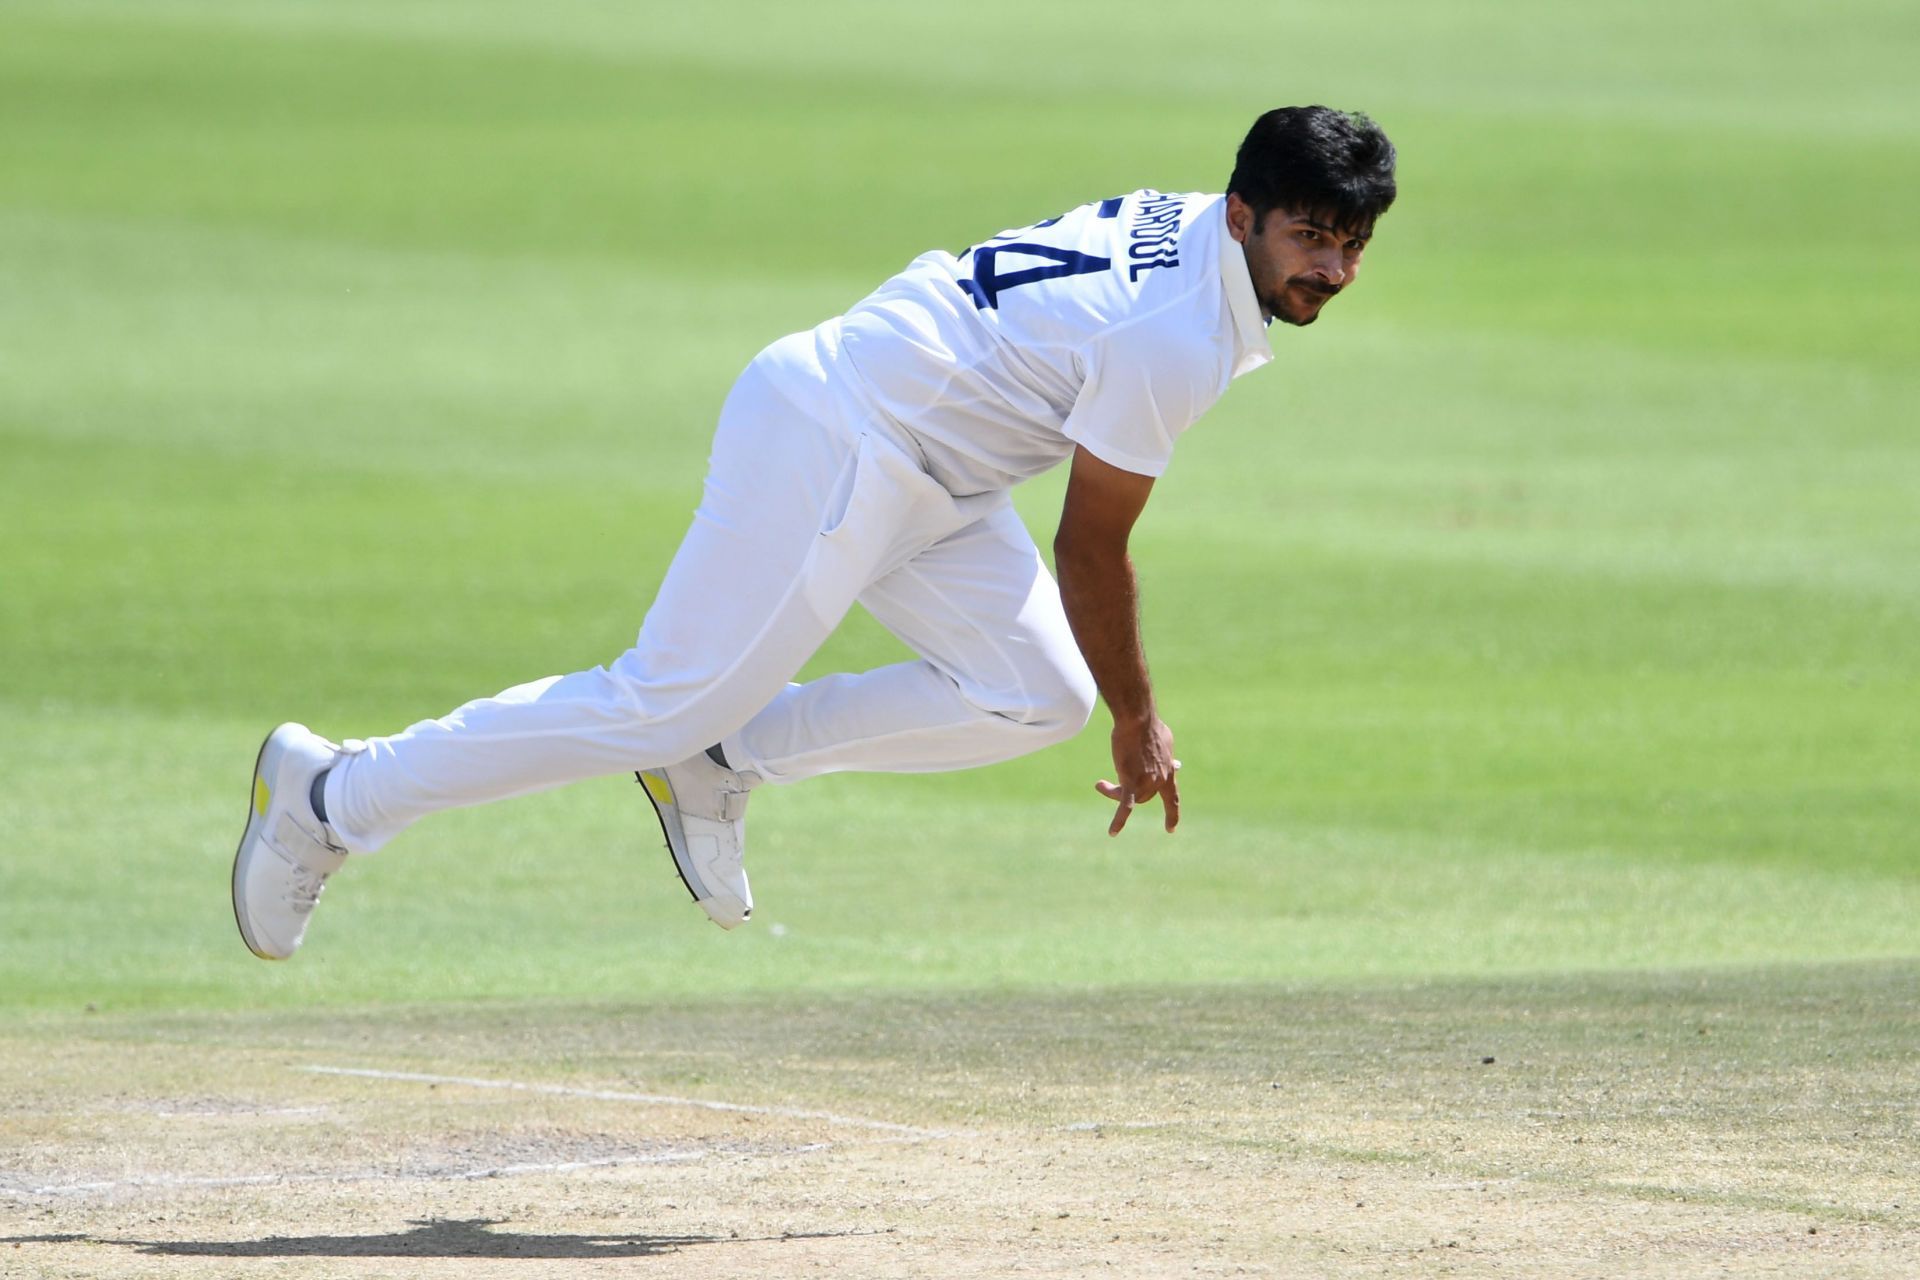 Shardul Thakur has dished out an outstanding all-round performance in the Johannesburg Test thus far